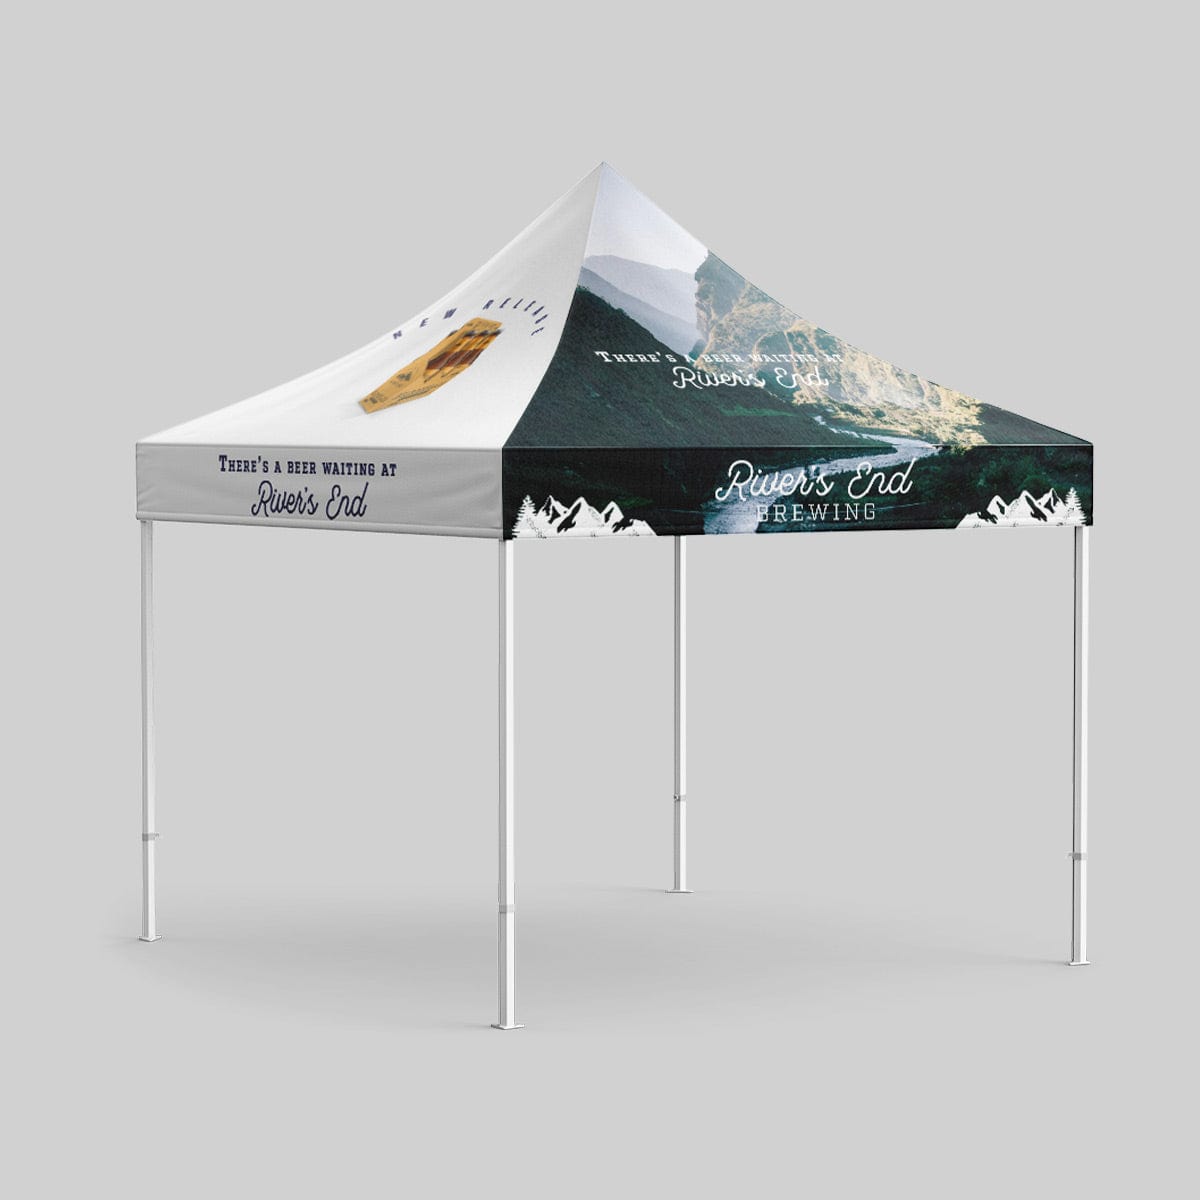 designs for tents for craft show   design, graphic design and